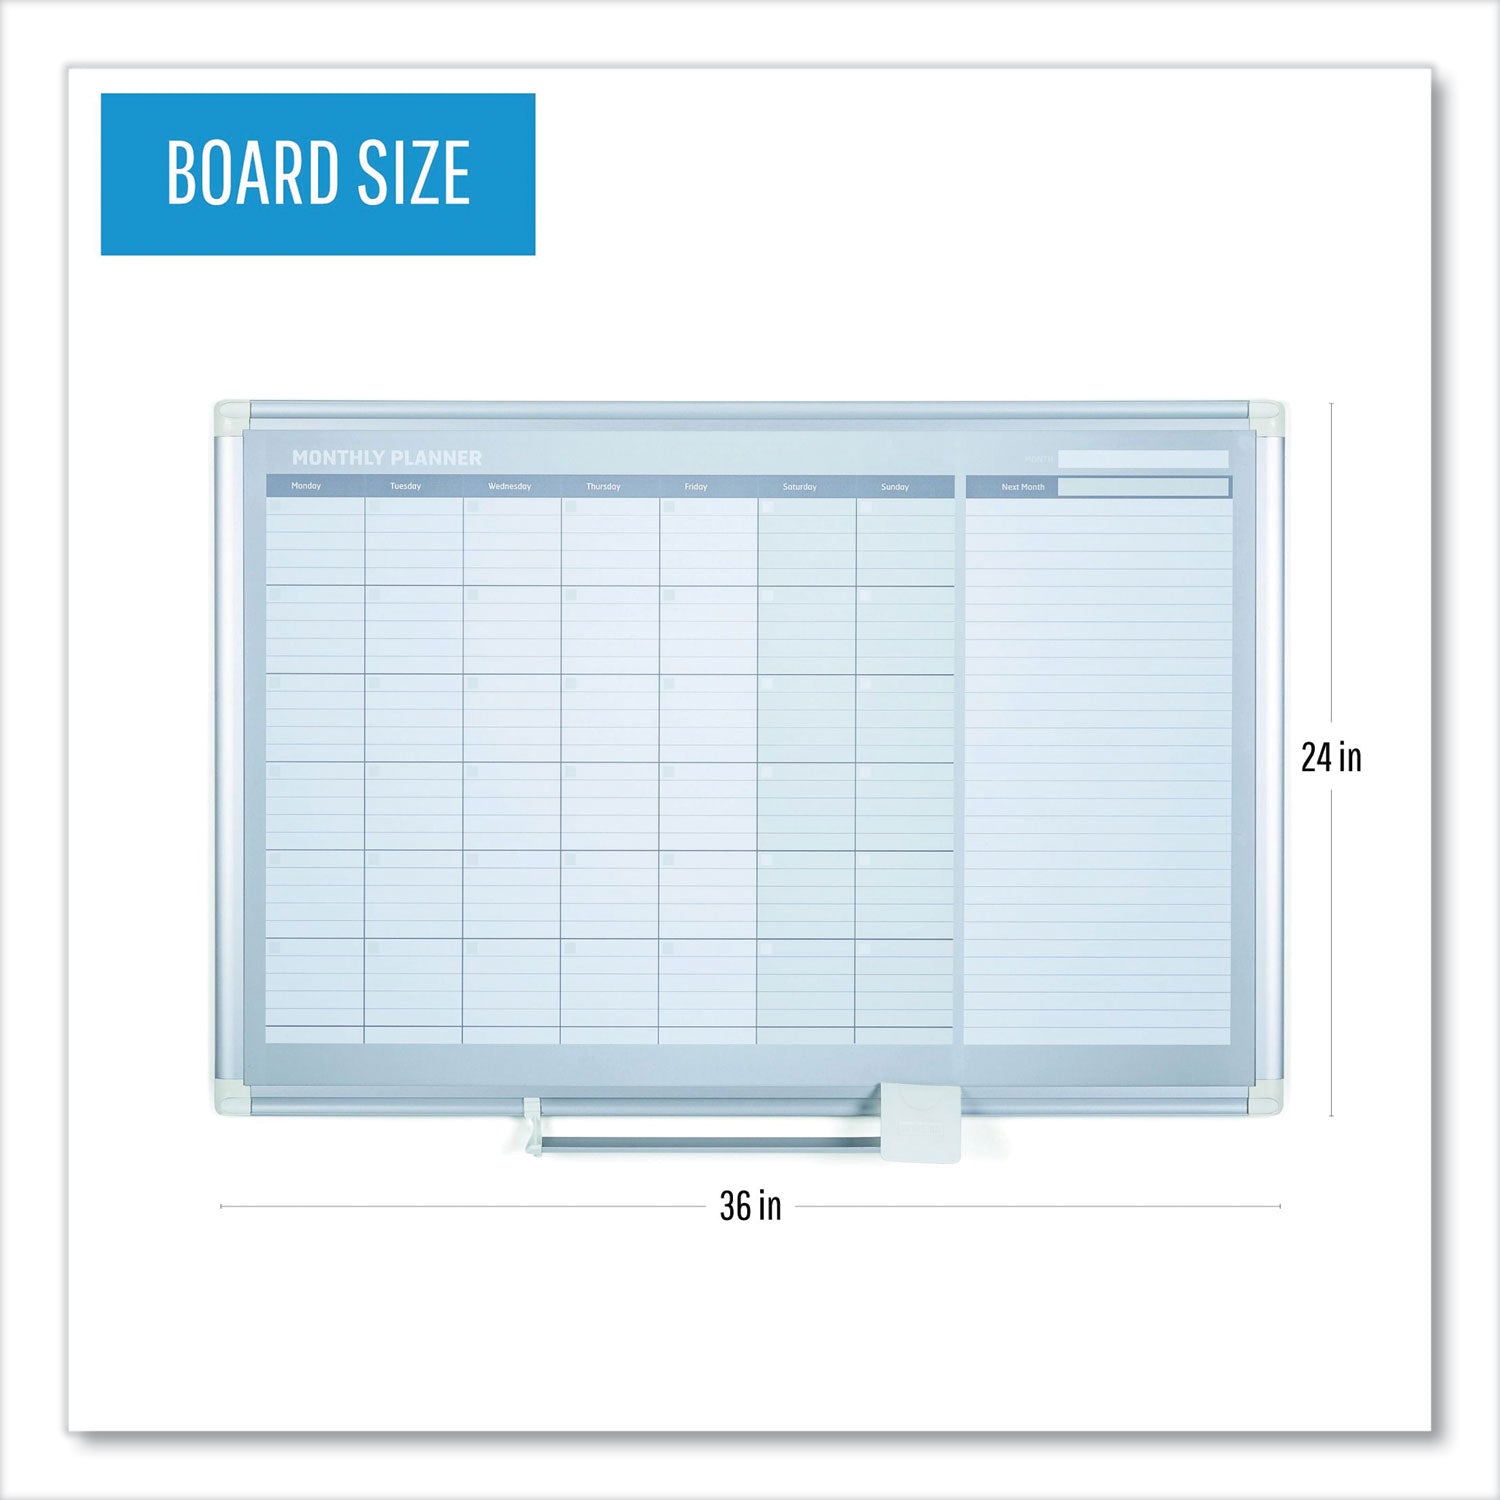 Magnetic Dry Erase Calendar Board, One Month, 36 x 24, White Surface, Silver Aluminum Frame - 